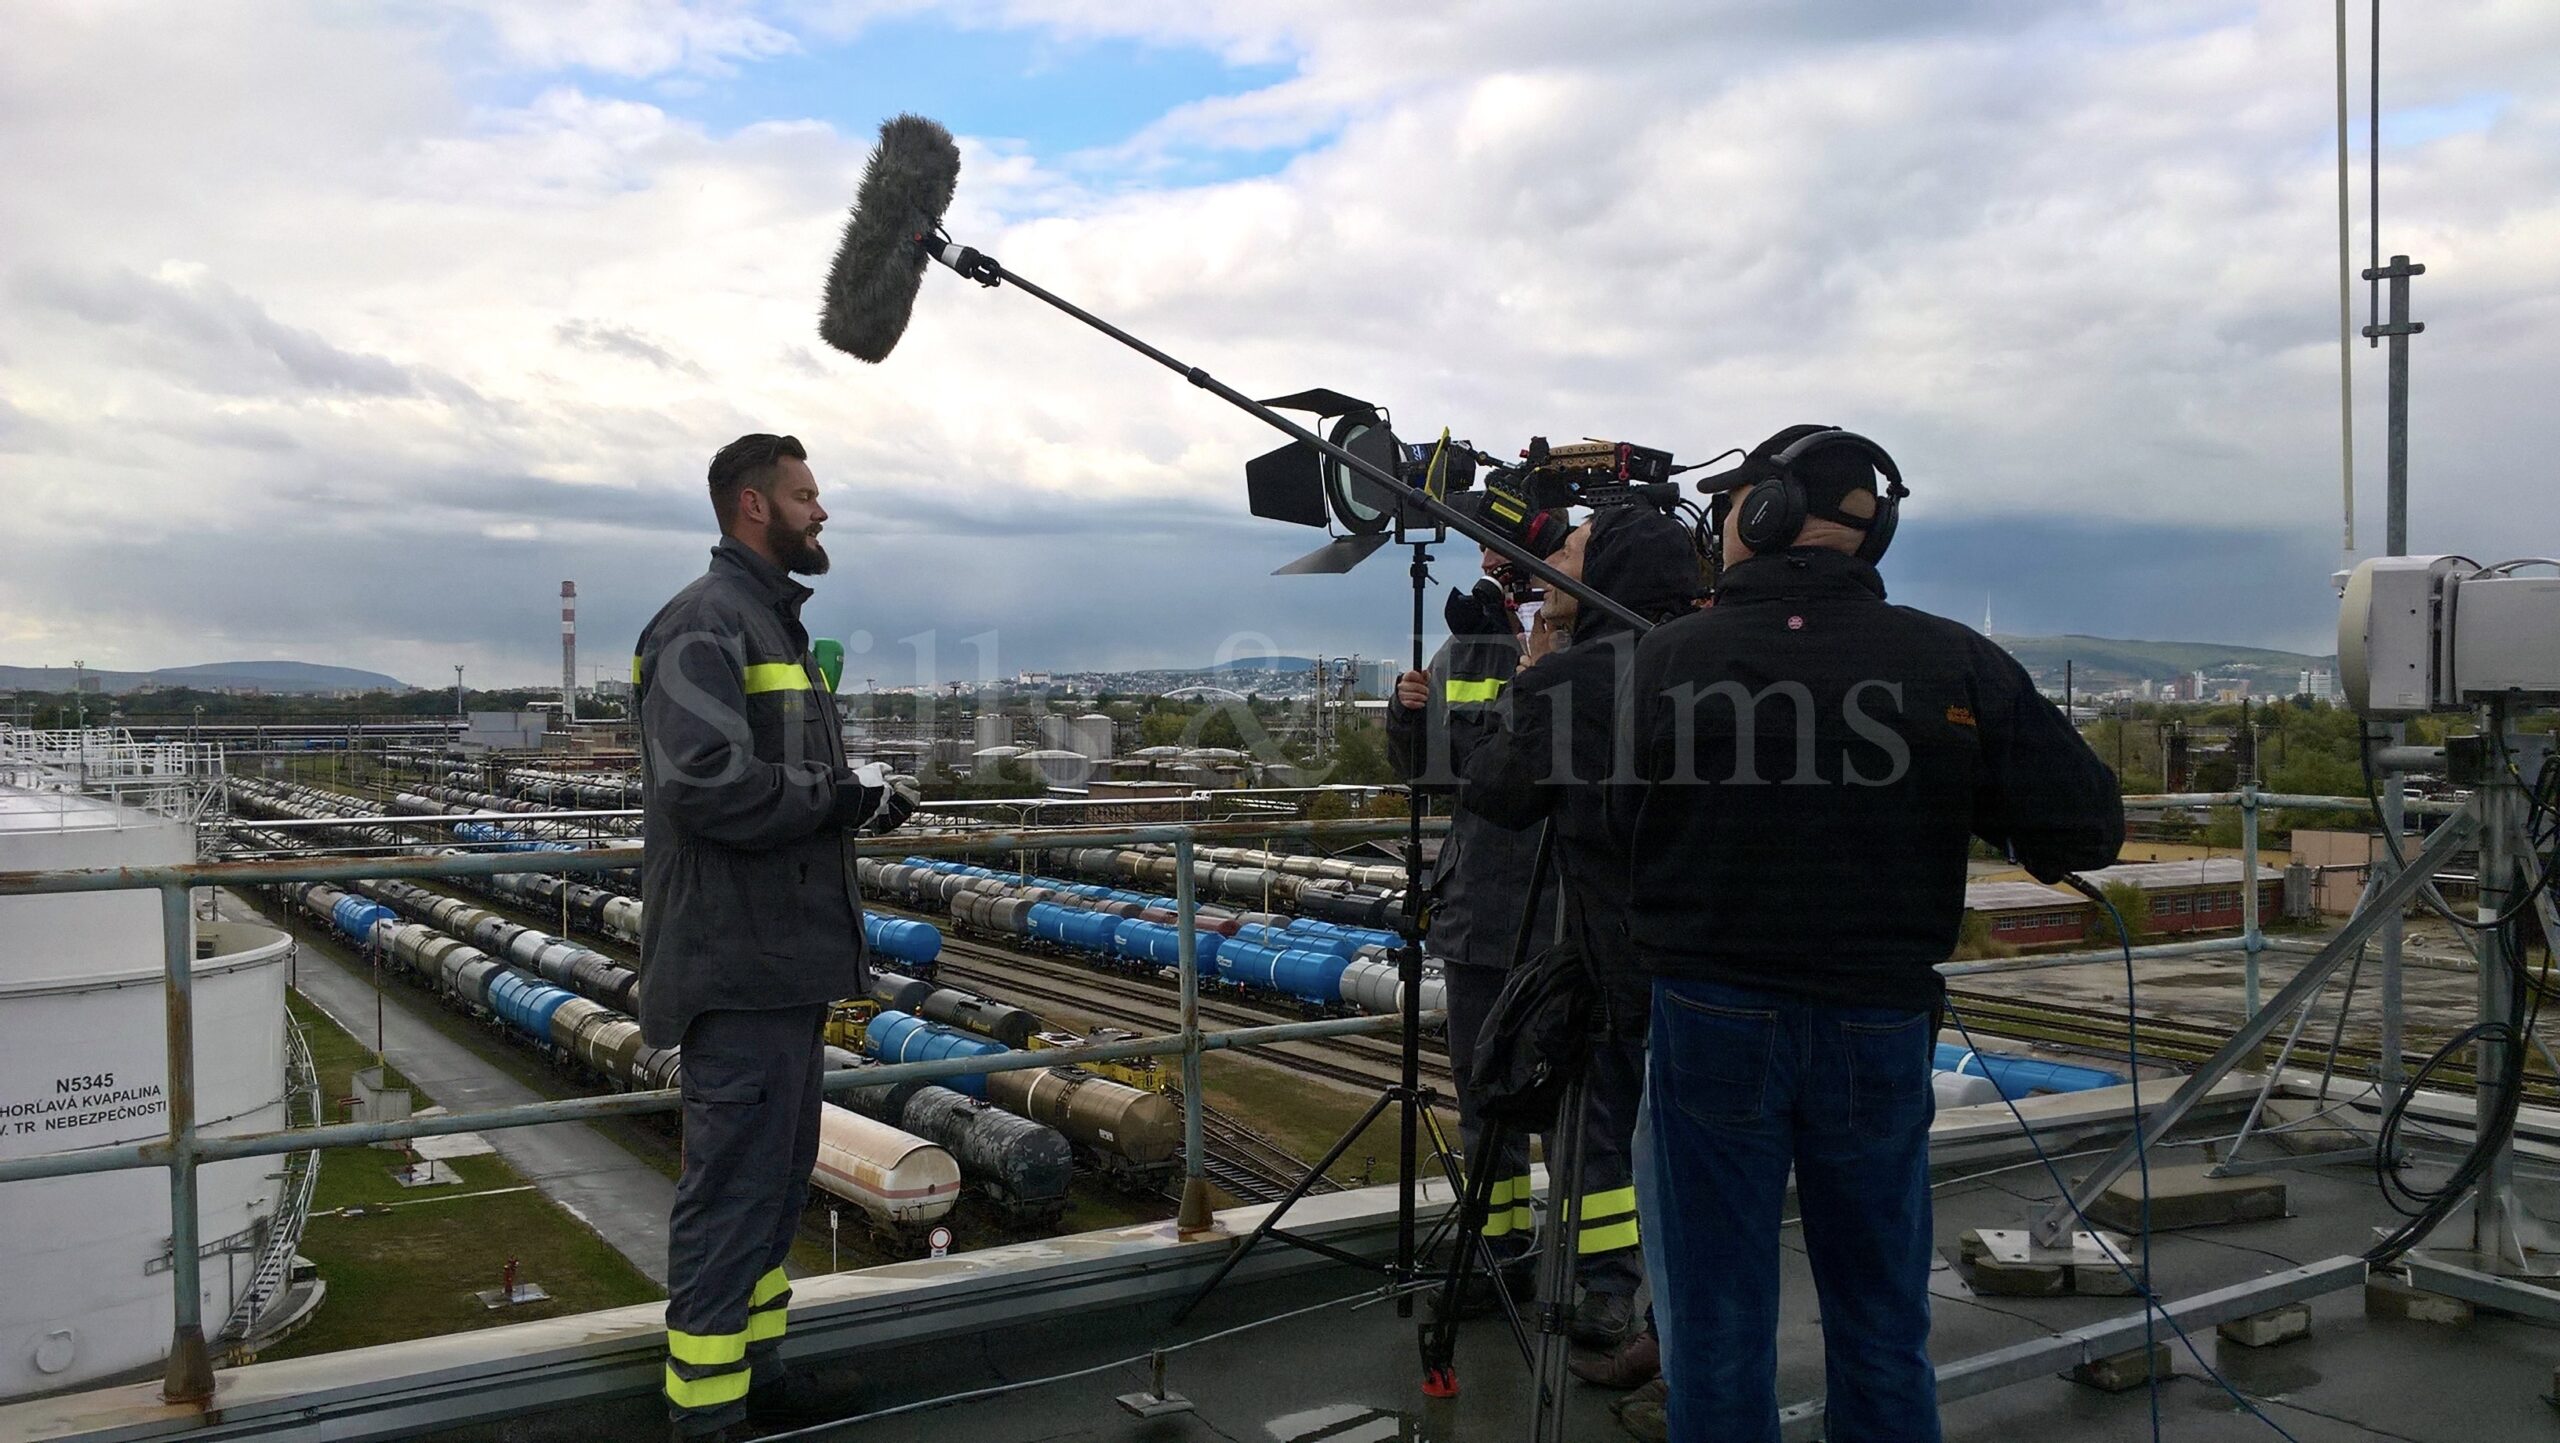 Our Bratislava based sound engineer on location at the Slovnaft refinery in Bratislava